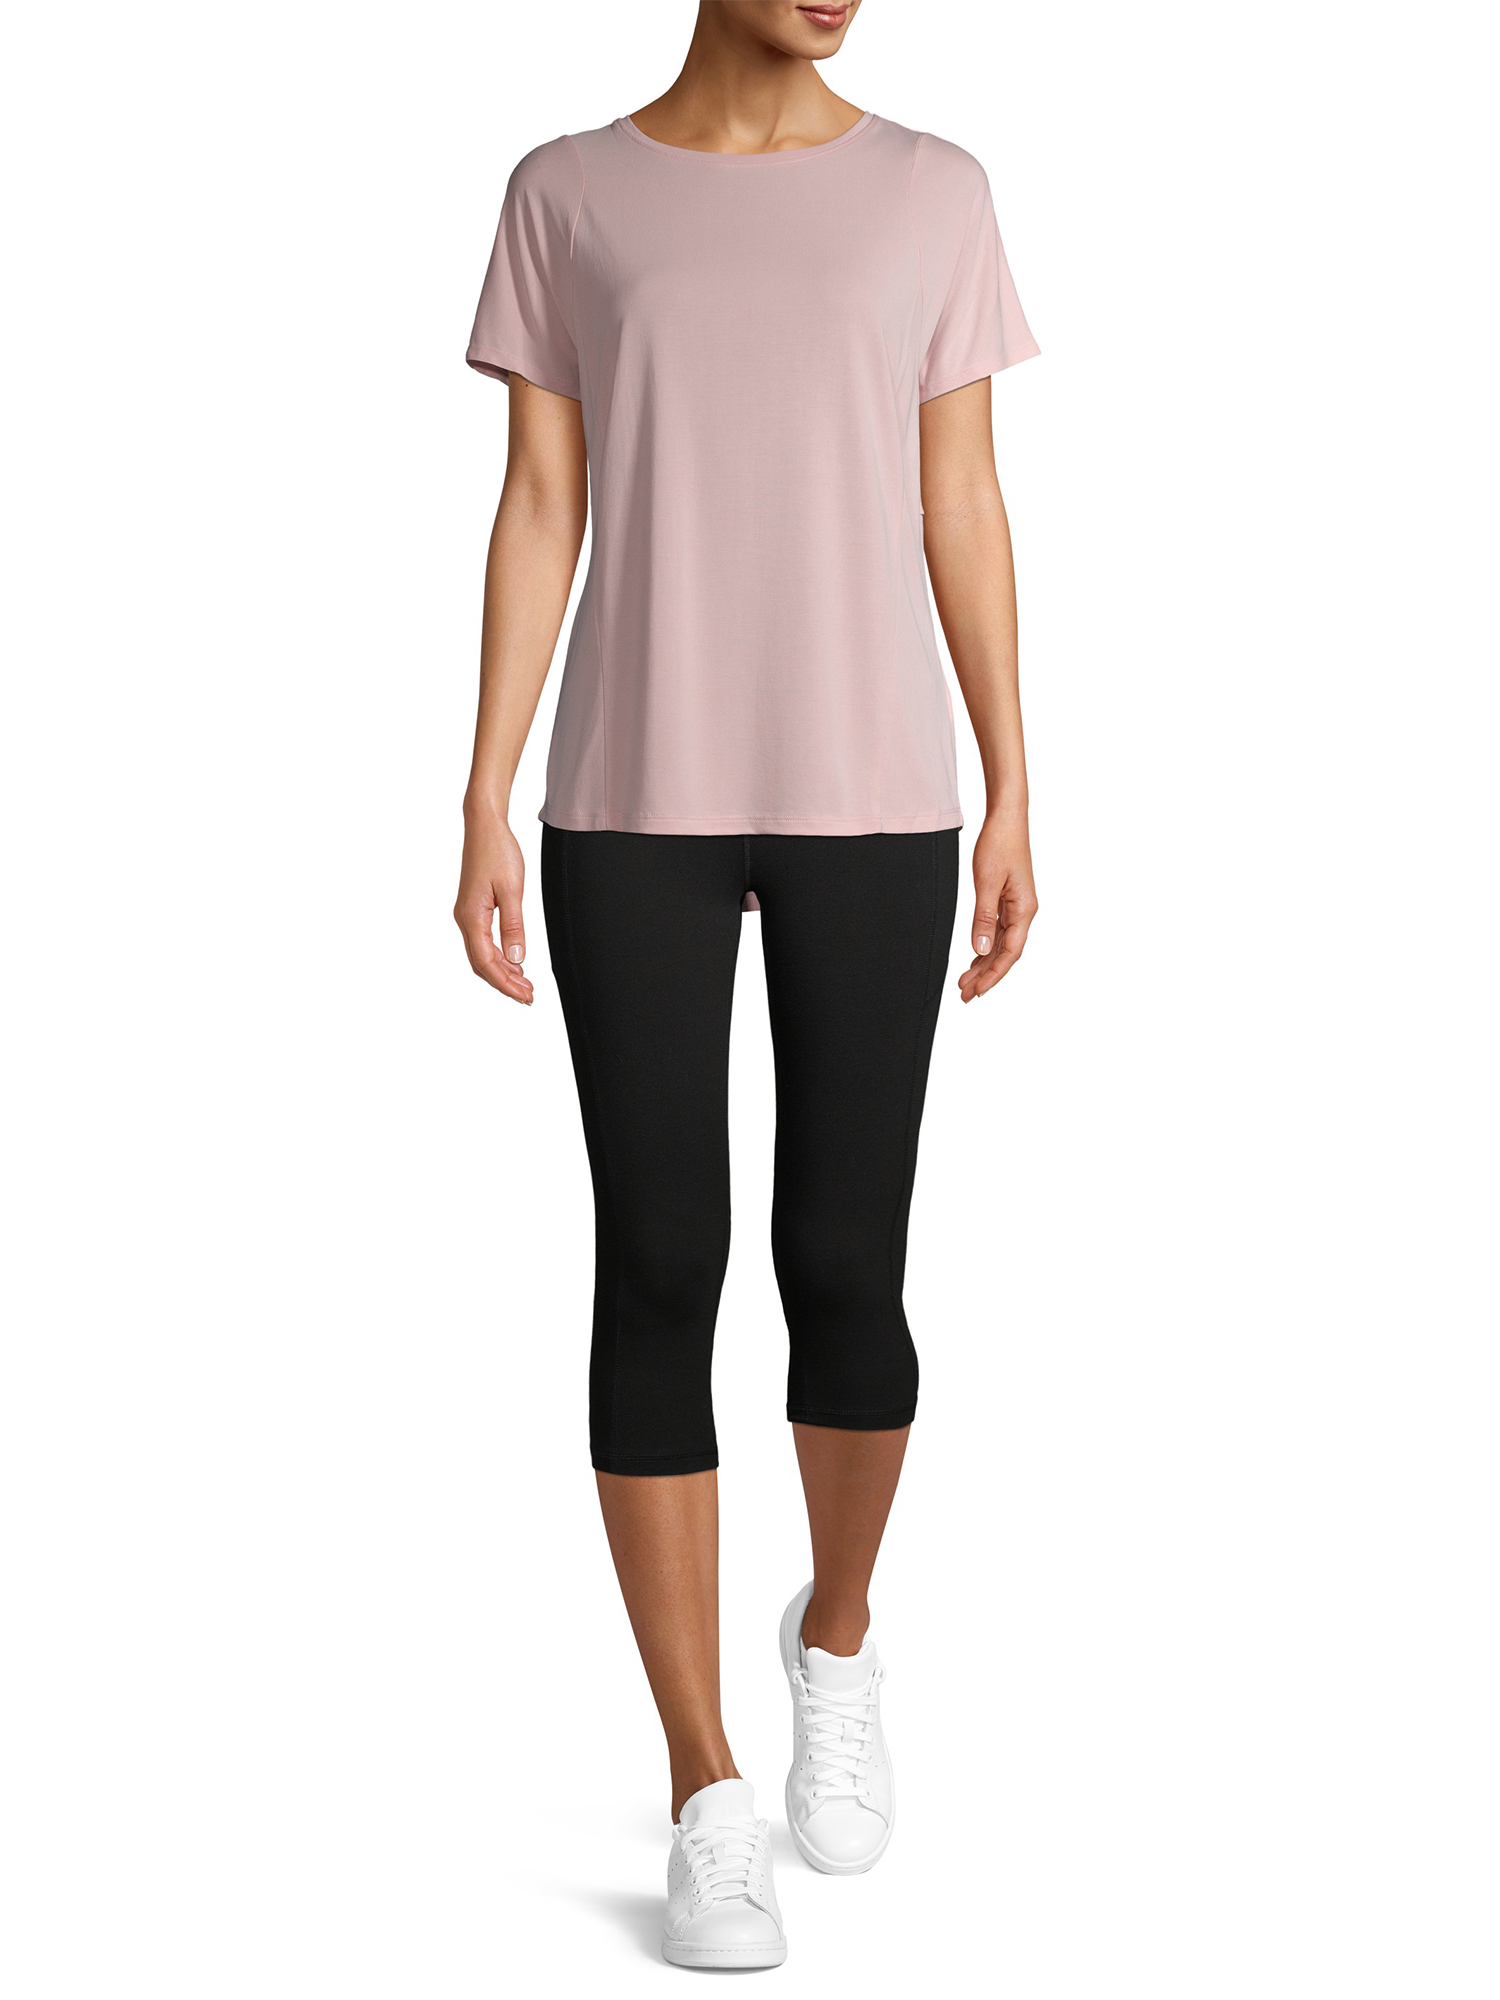 Athletic Works Women's Capris with Side Pockets - image 2 of 6